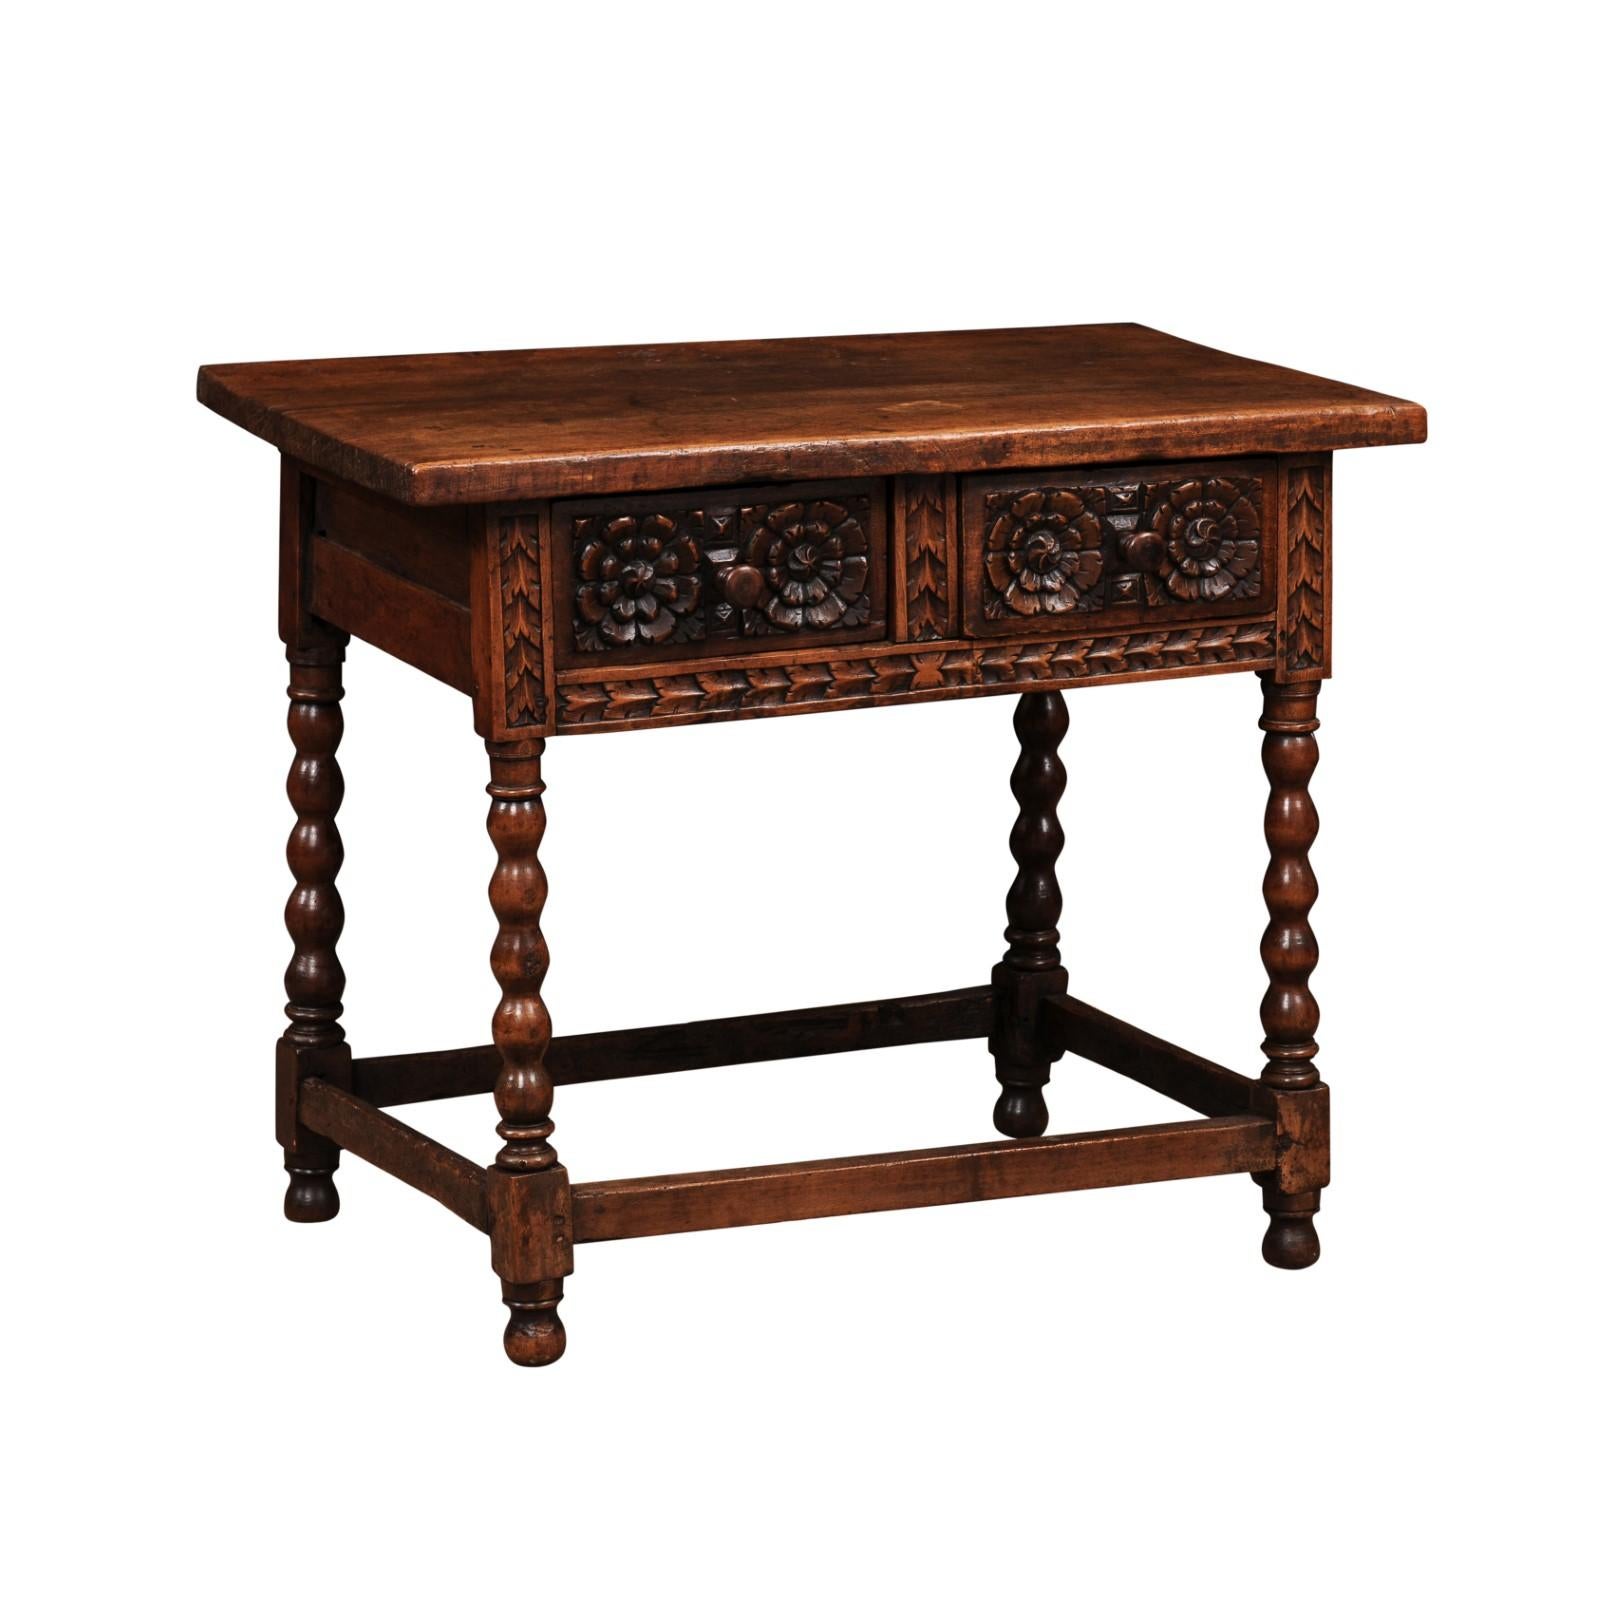 18th Century Spanish Walnut Table with Carved Frieze and 2 Drawers In Good Condition For Sale In Atlanta, GA